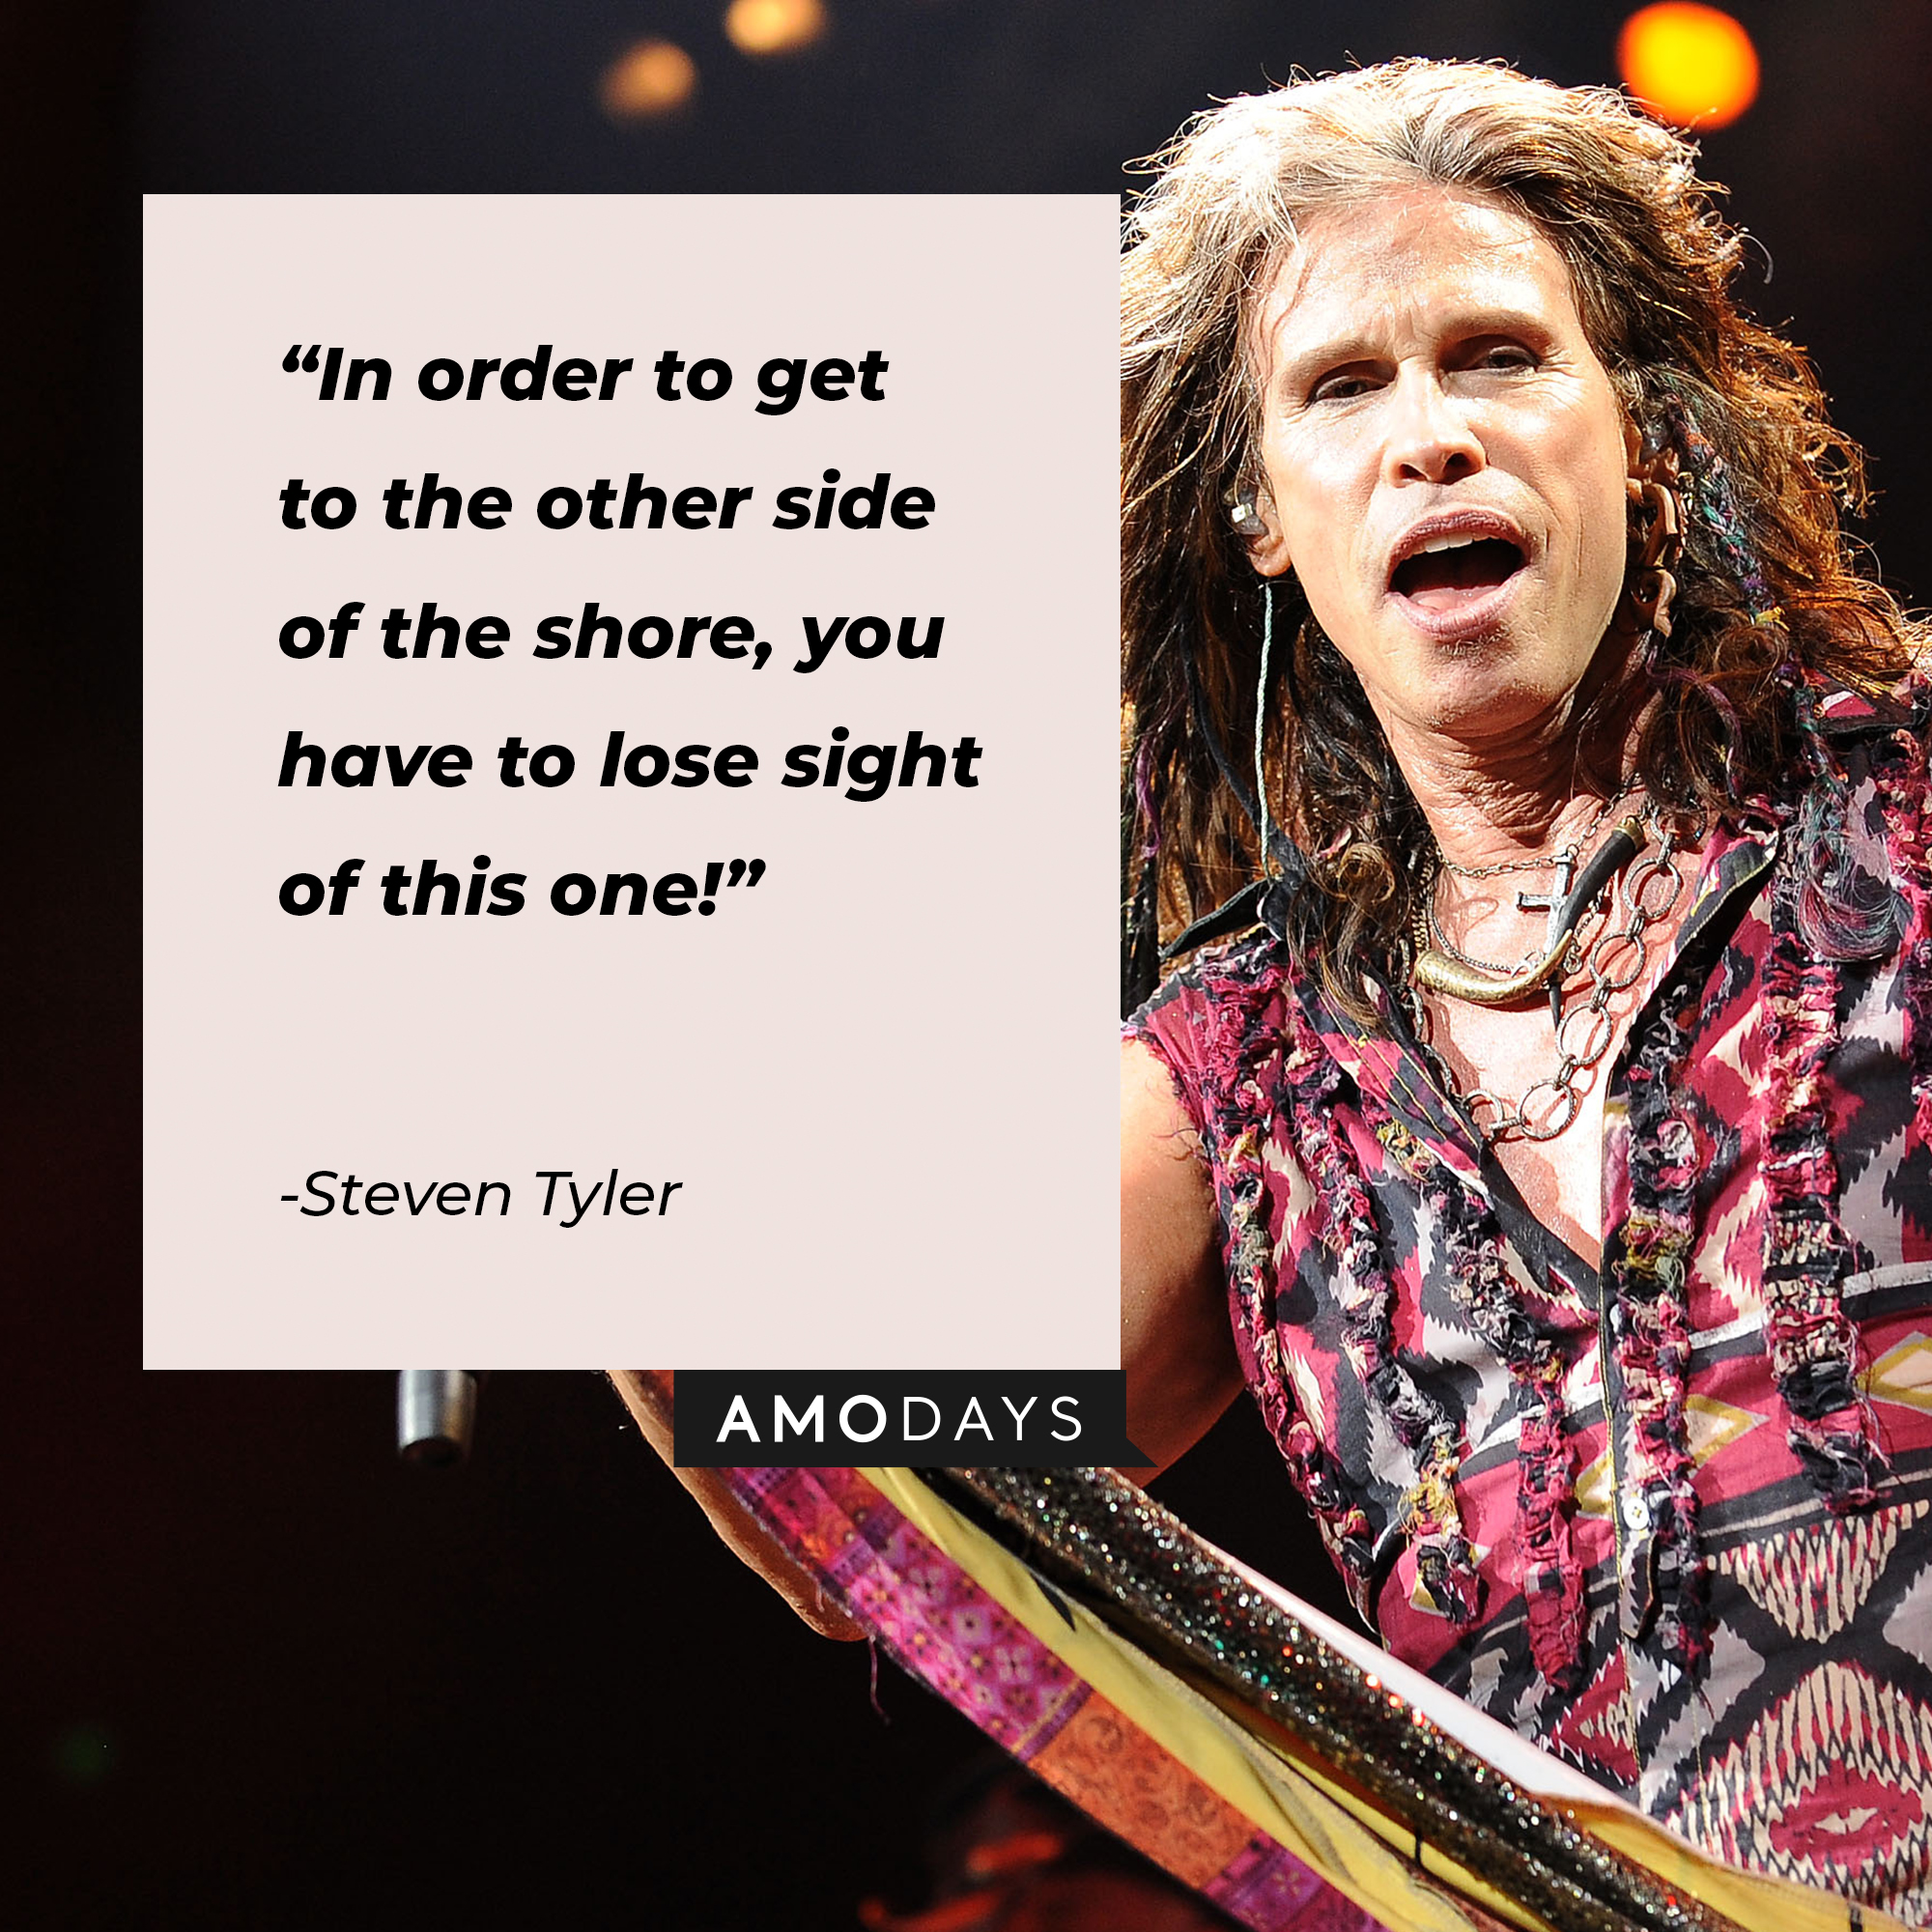 Steven Tyler's quote: "In order to get to the other side of the shore, you have to lose sight of this one!" | Source: Getty Images